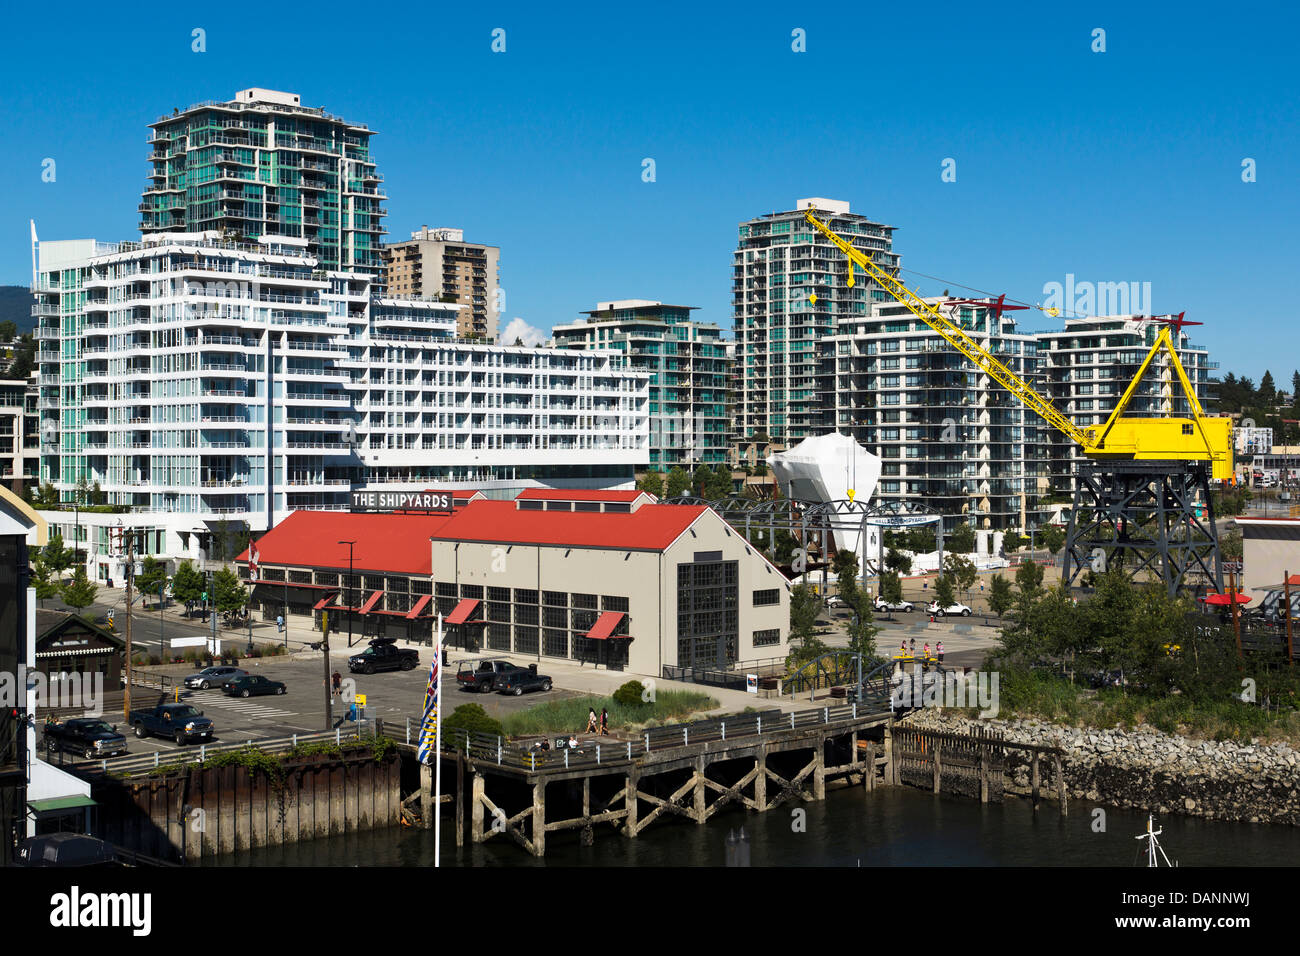 Old Wallace Shipyard site, now Pinnacle Hotel, condos and waterfront. North Vancouver, British Columbia, Canada. Stock Photo